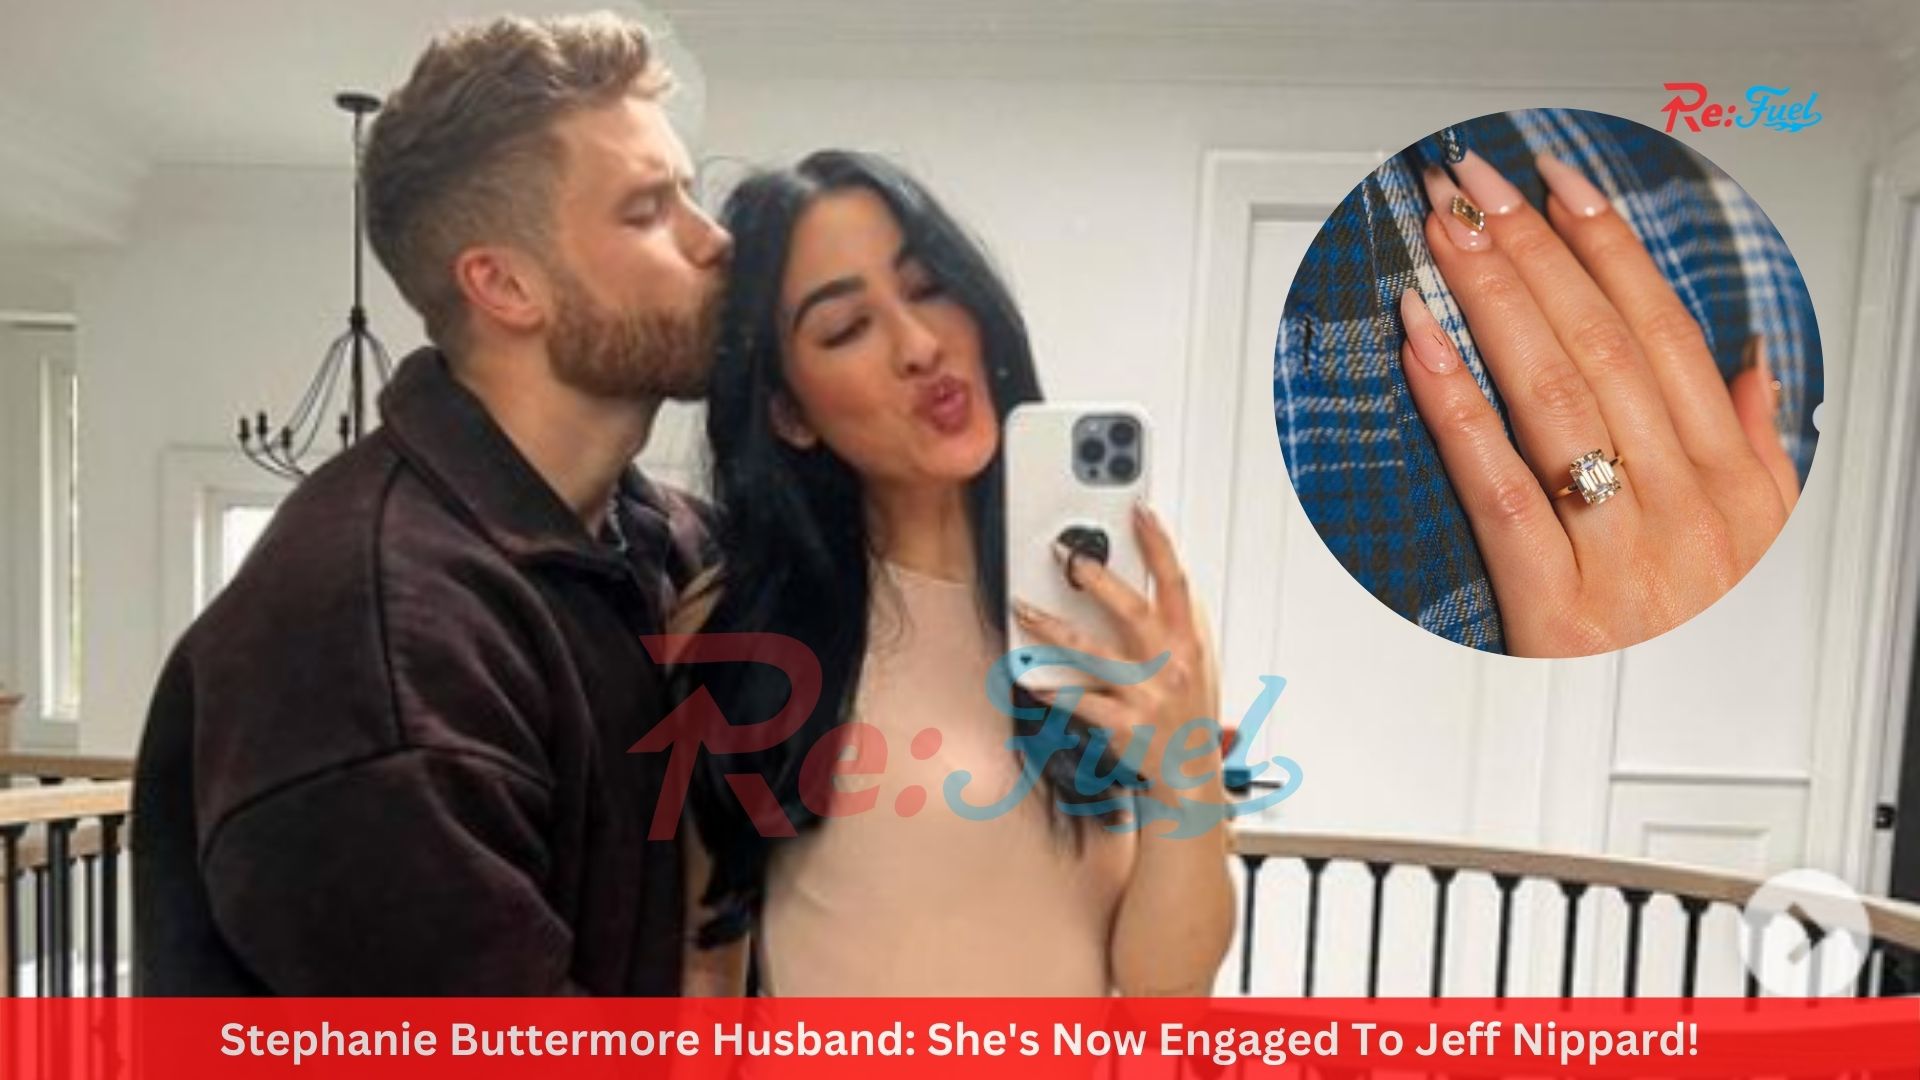 Stephanie Buttermore Husband: She's Now Engaged To Jeff Nippard!